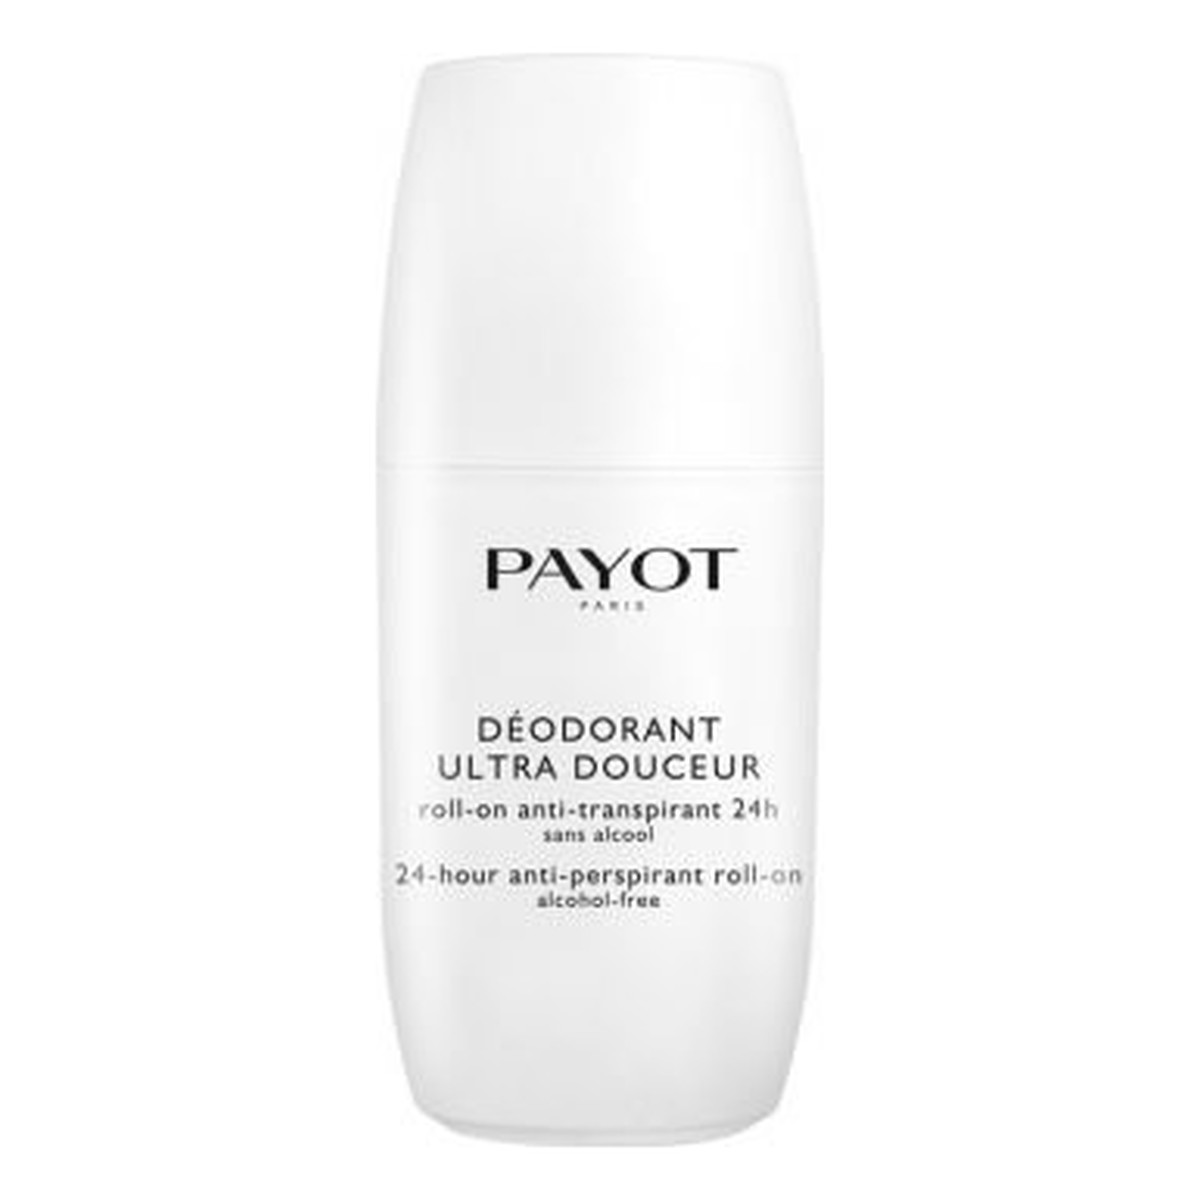 Payot Le Corps Deodorant Ultra Doceur Bezalkoholowy antyperspirant roll-on 75ml